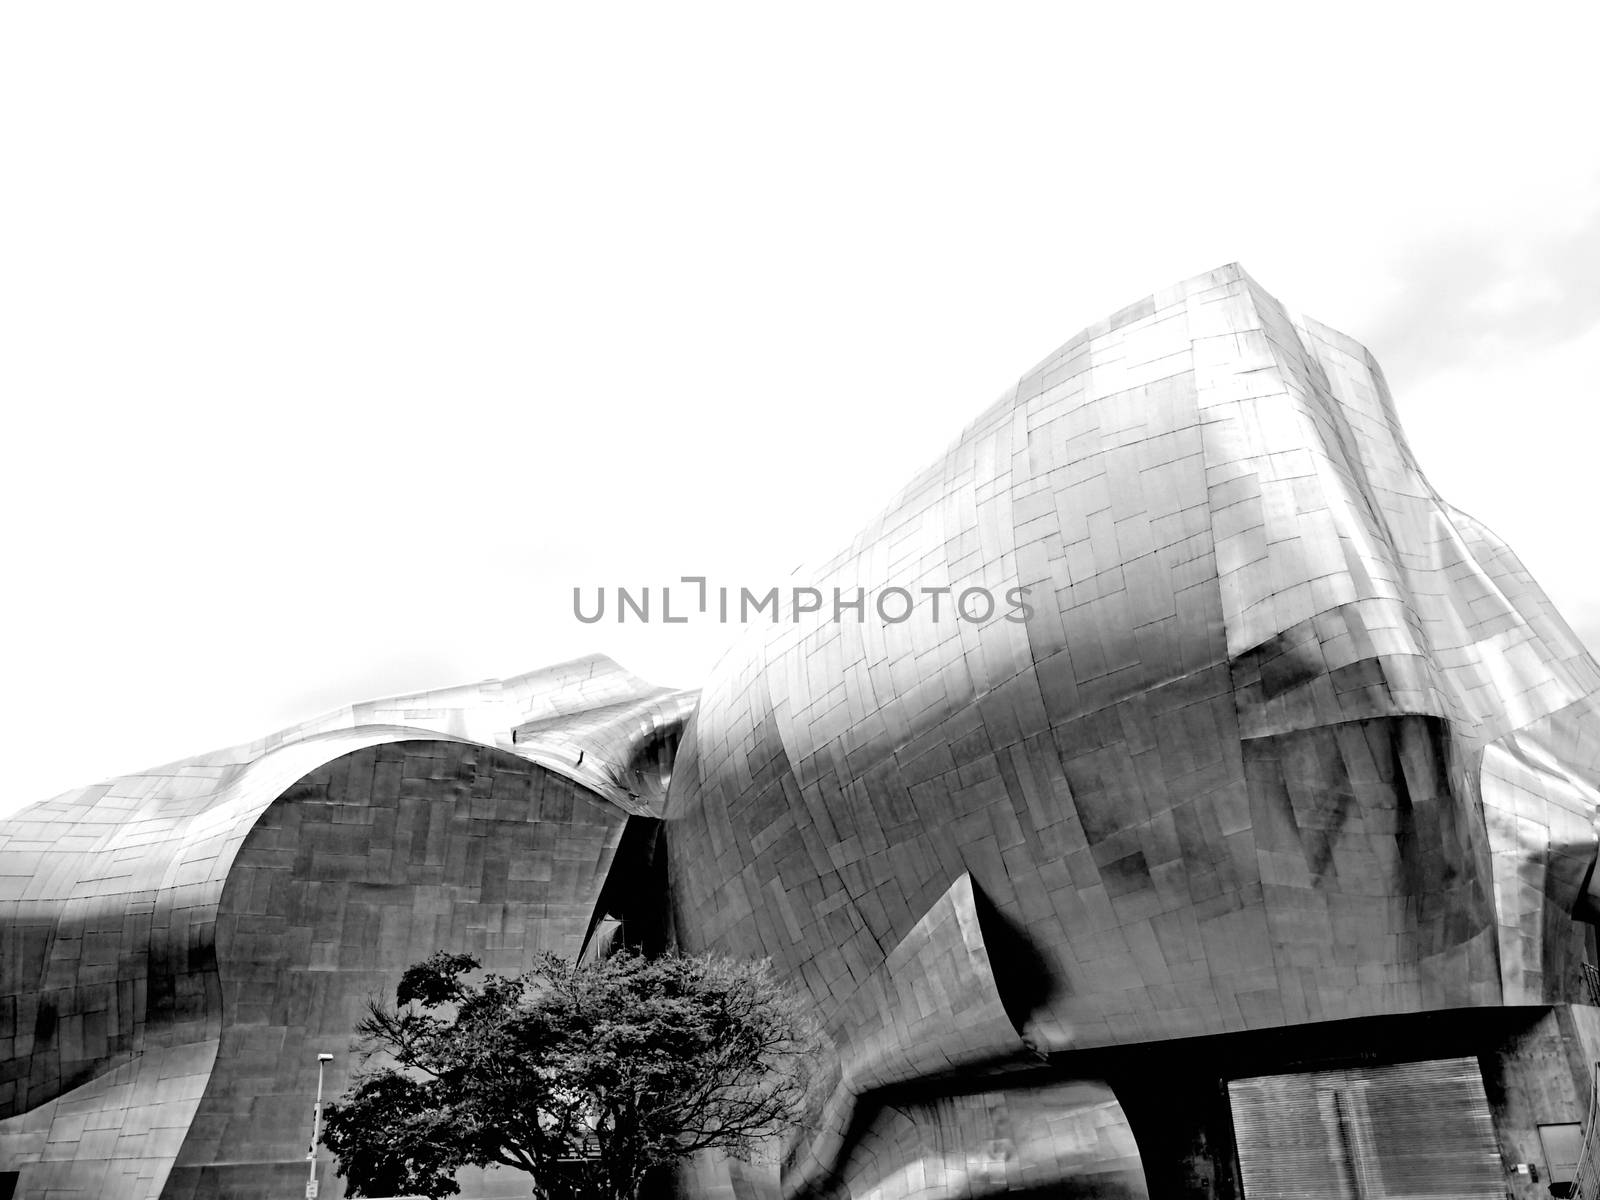 SEATTLE - SEPTEMBER 6: Experience Music Project (EMP) with Seatt by anderm